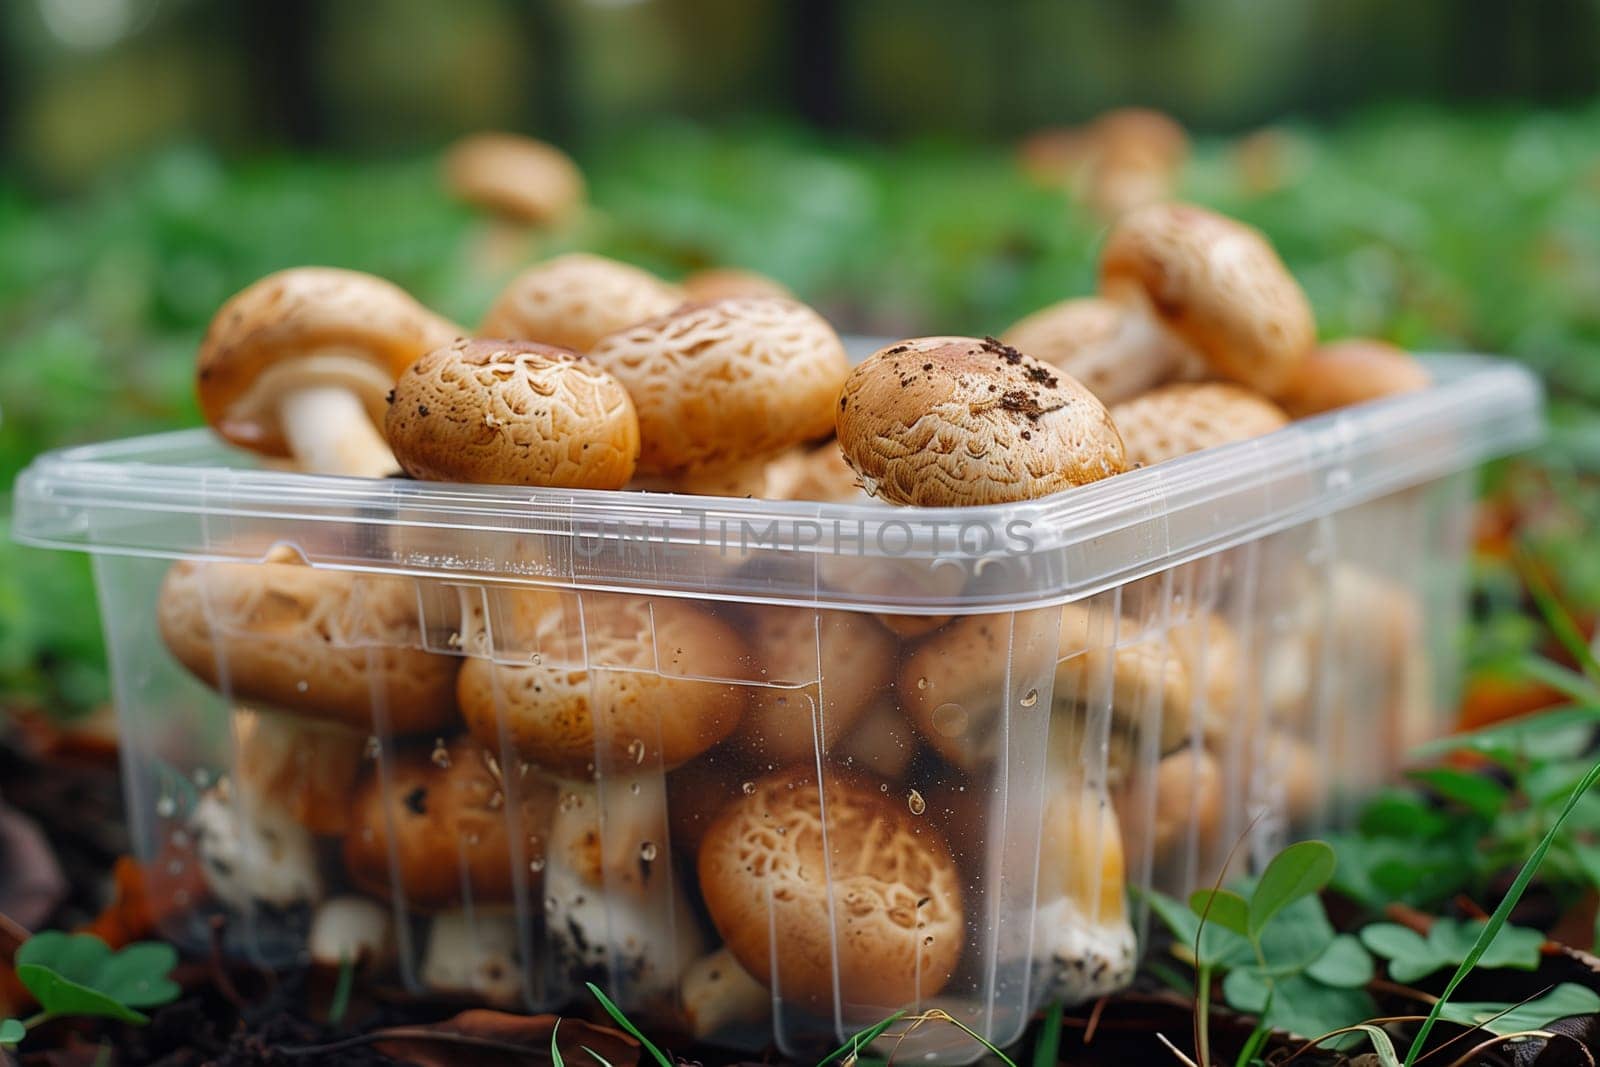 Plastic container filled with numerous mushrooms of various sizes and colors.